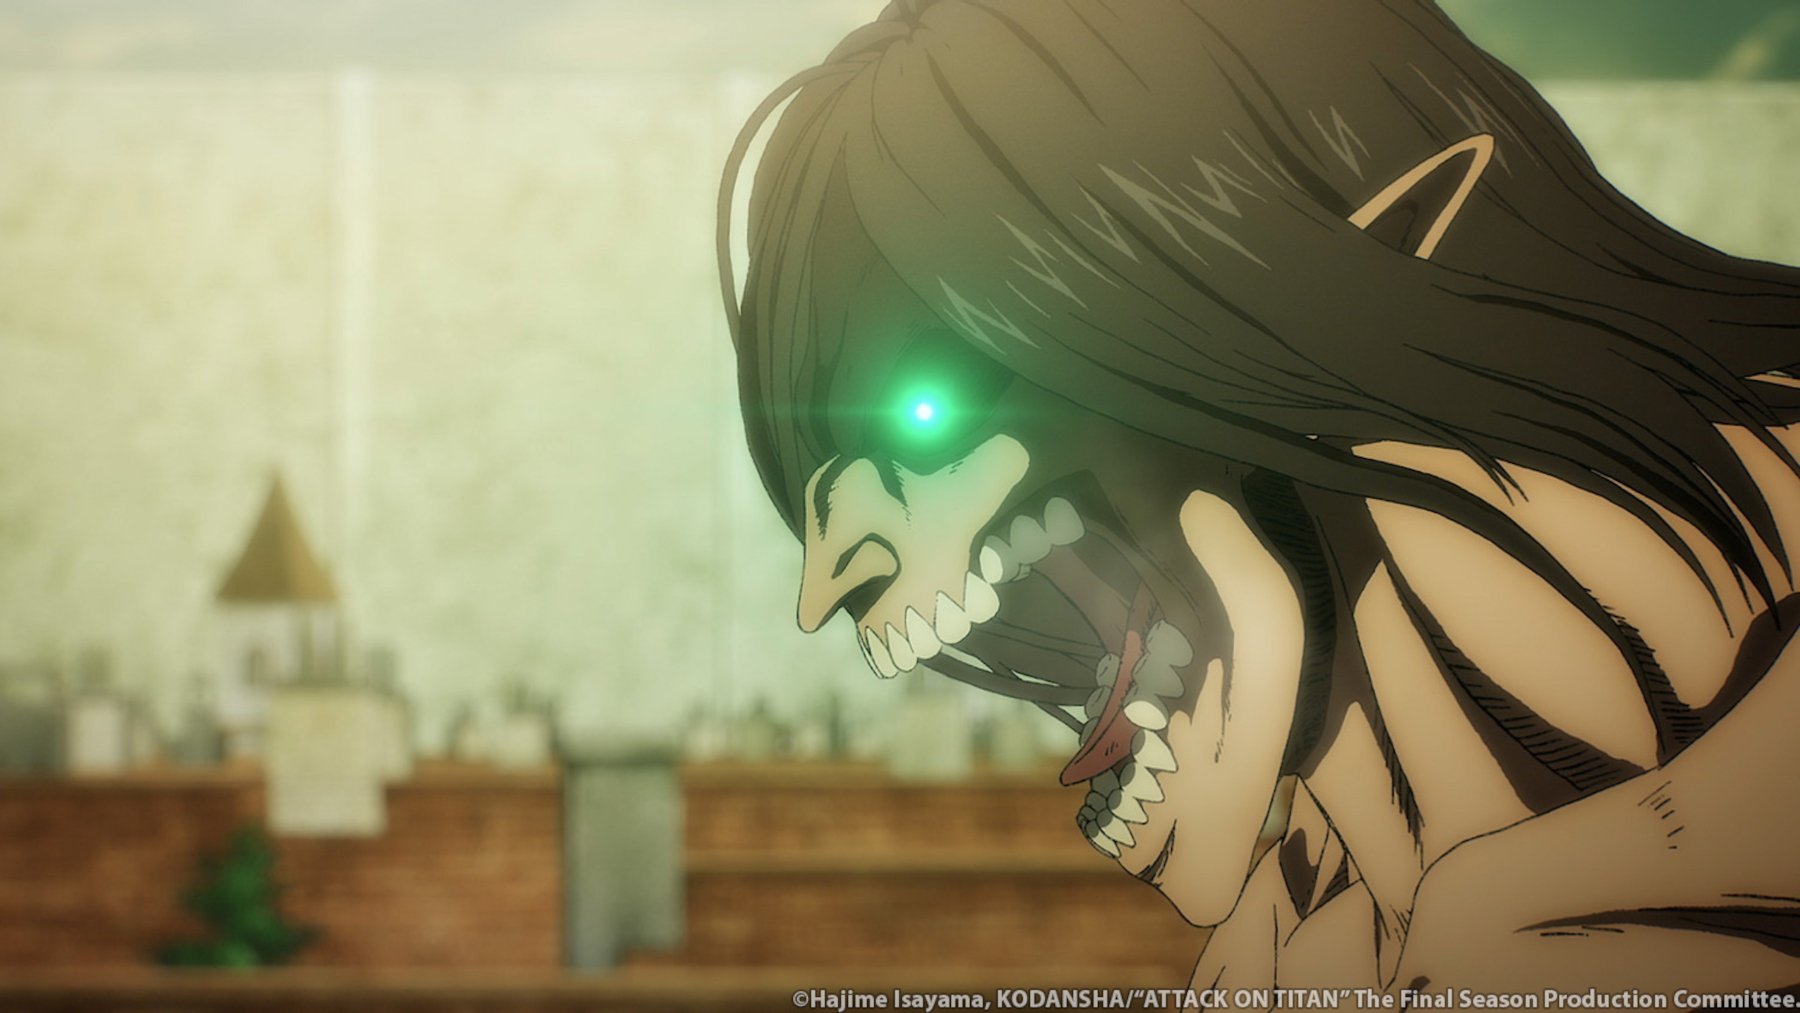 Eren Yeager as the Attack Titan in 'Attack on Titan,' which is doing a collaboration with 'Dead by Daylight.' The image shows a side profile of his Titan, whose eyes are glowing green.